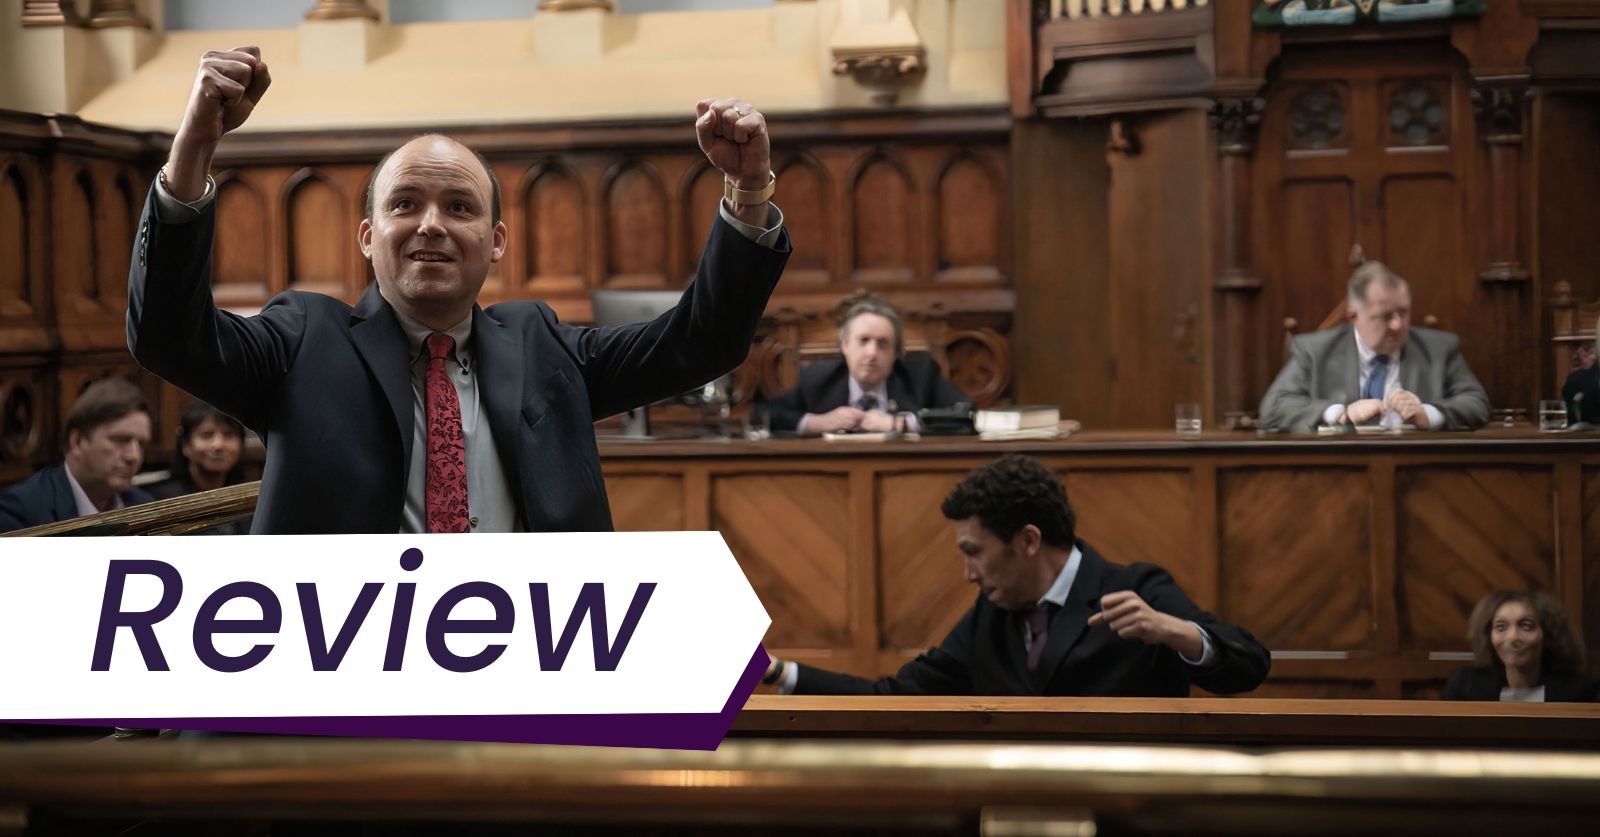 Rory Kinnear (left) and Joely Fry (right) star in the new film Bank of Dave. Photo courtesy of Samuel Goldwyn films. Dave is standing with his fists in the air in a courtroom after winning his case. Hugh is seated behind him also with his fists in the air. Two magistrates can be seen sitting behind them.